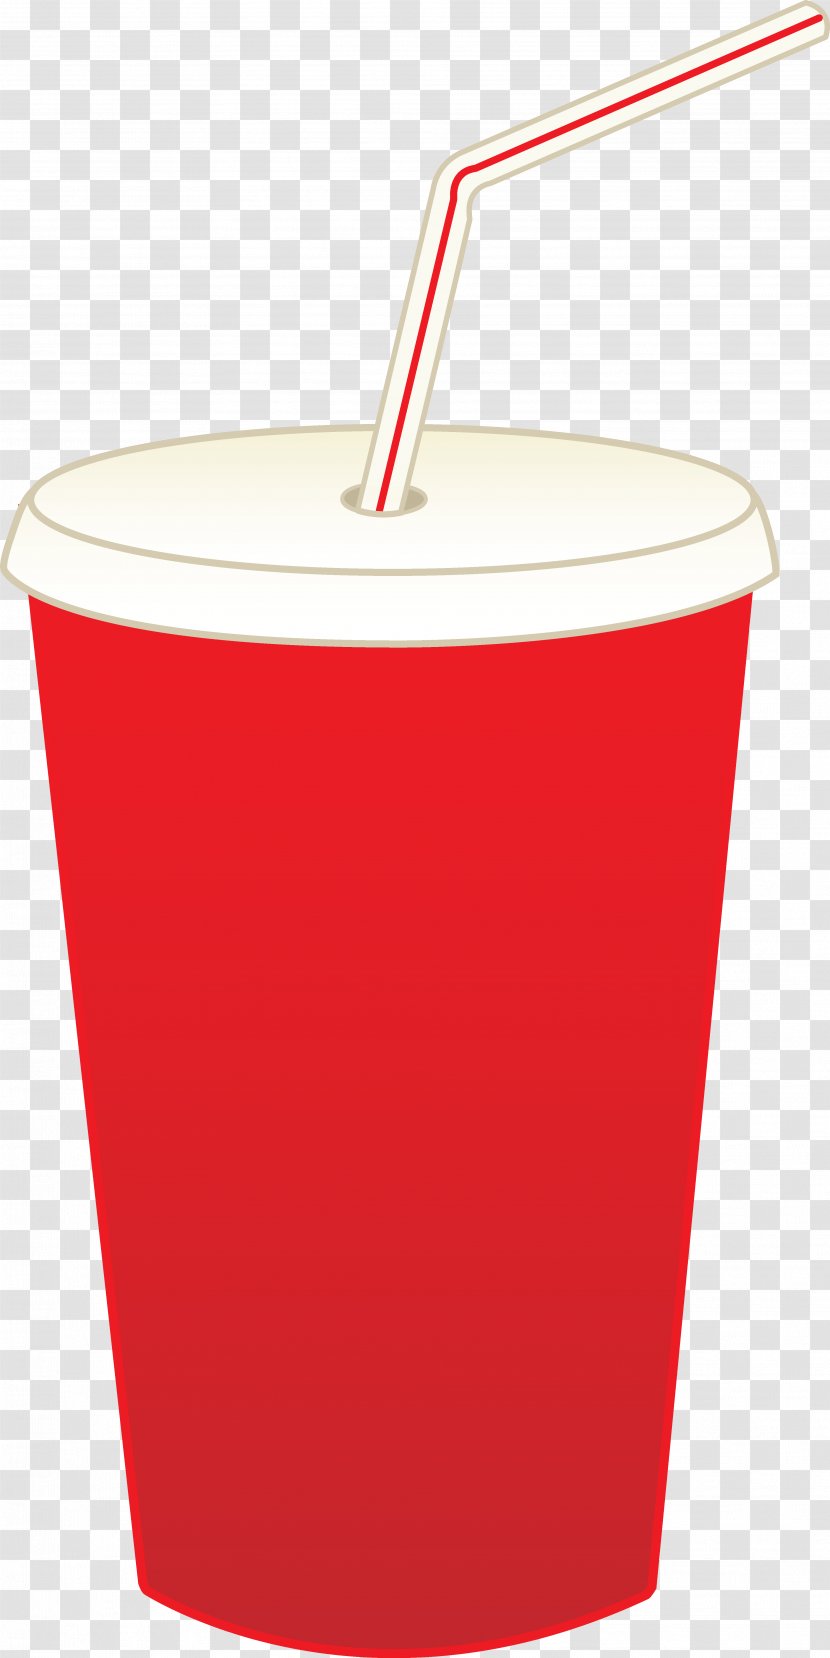 Soft Drink Coca-Cola Fast Food Clip Art - Bitmap - Drinking Straw Cliparts Transparent PNG